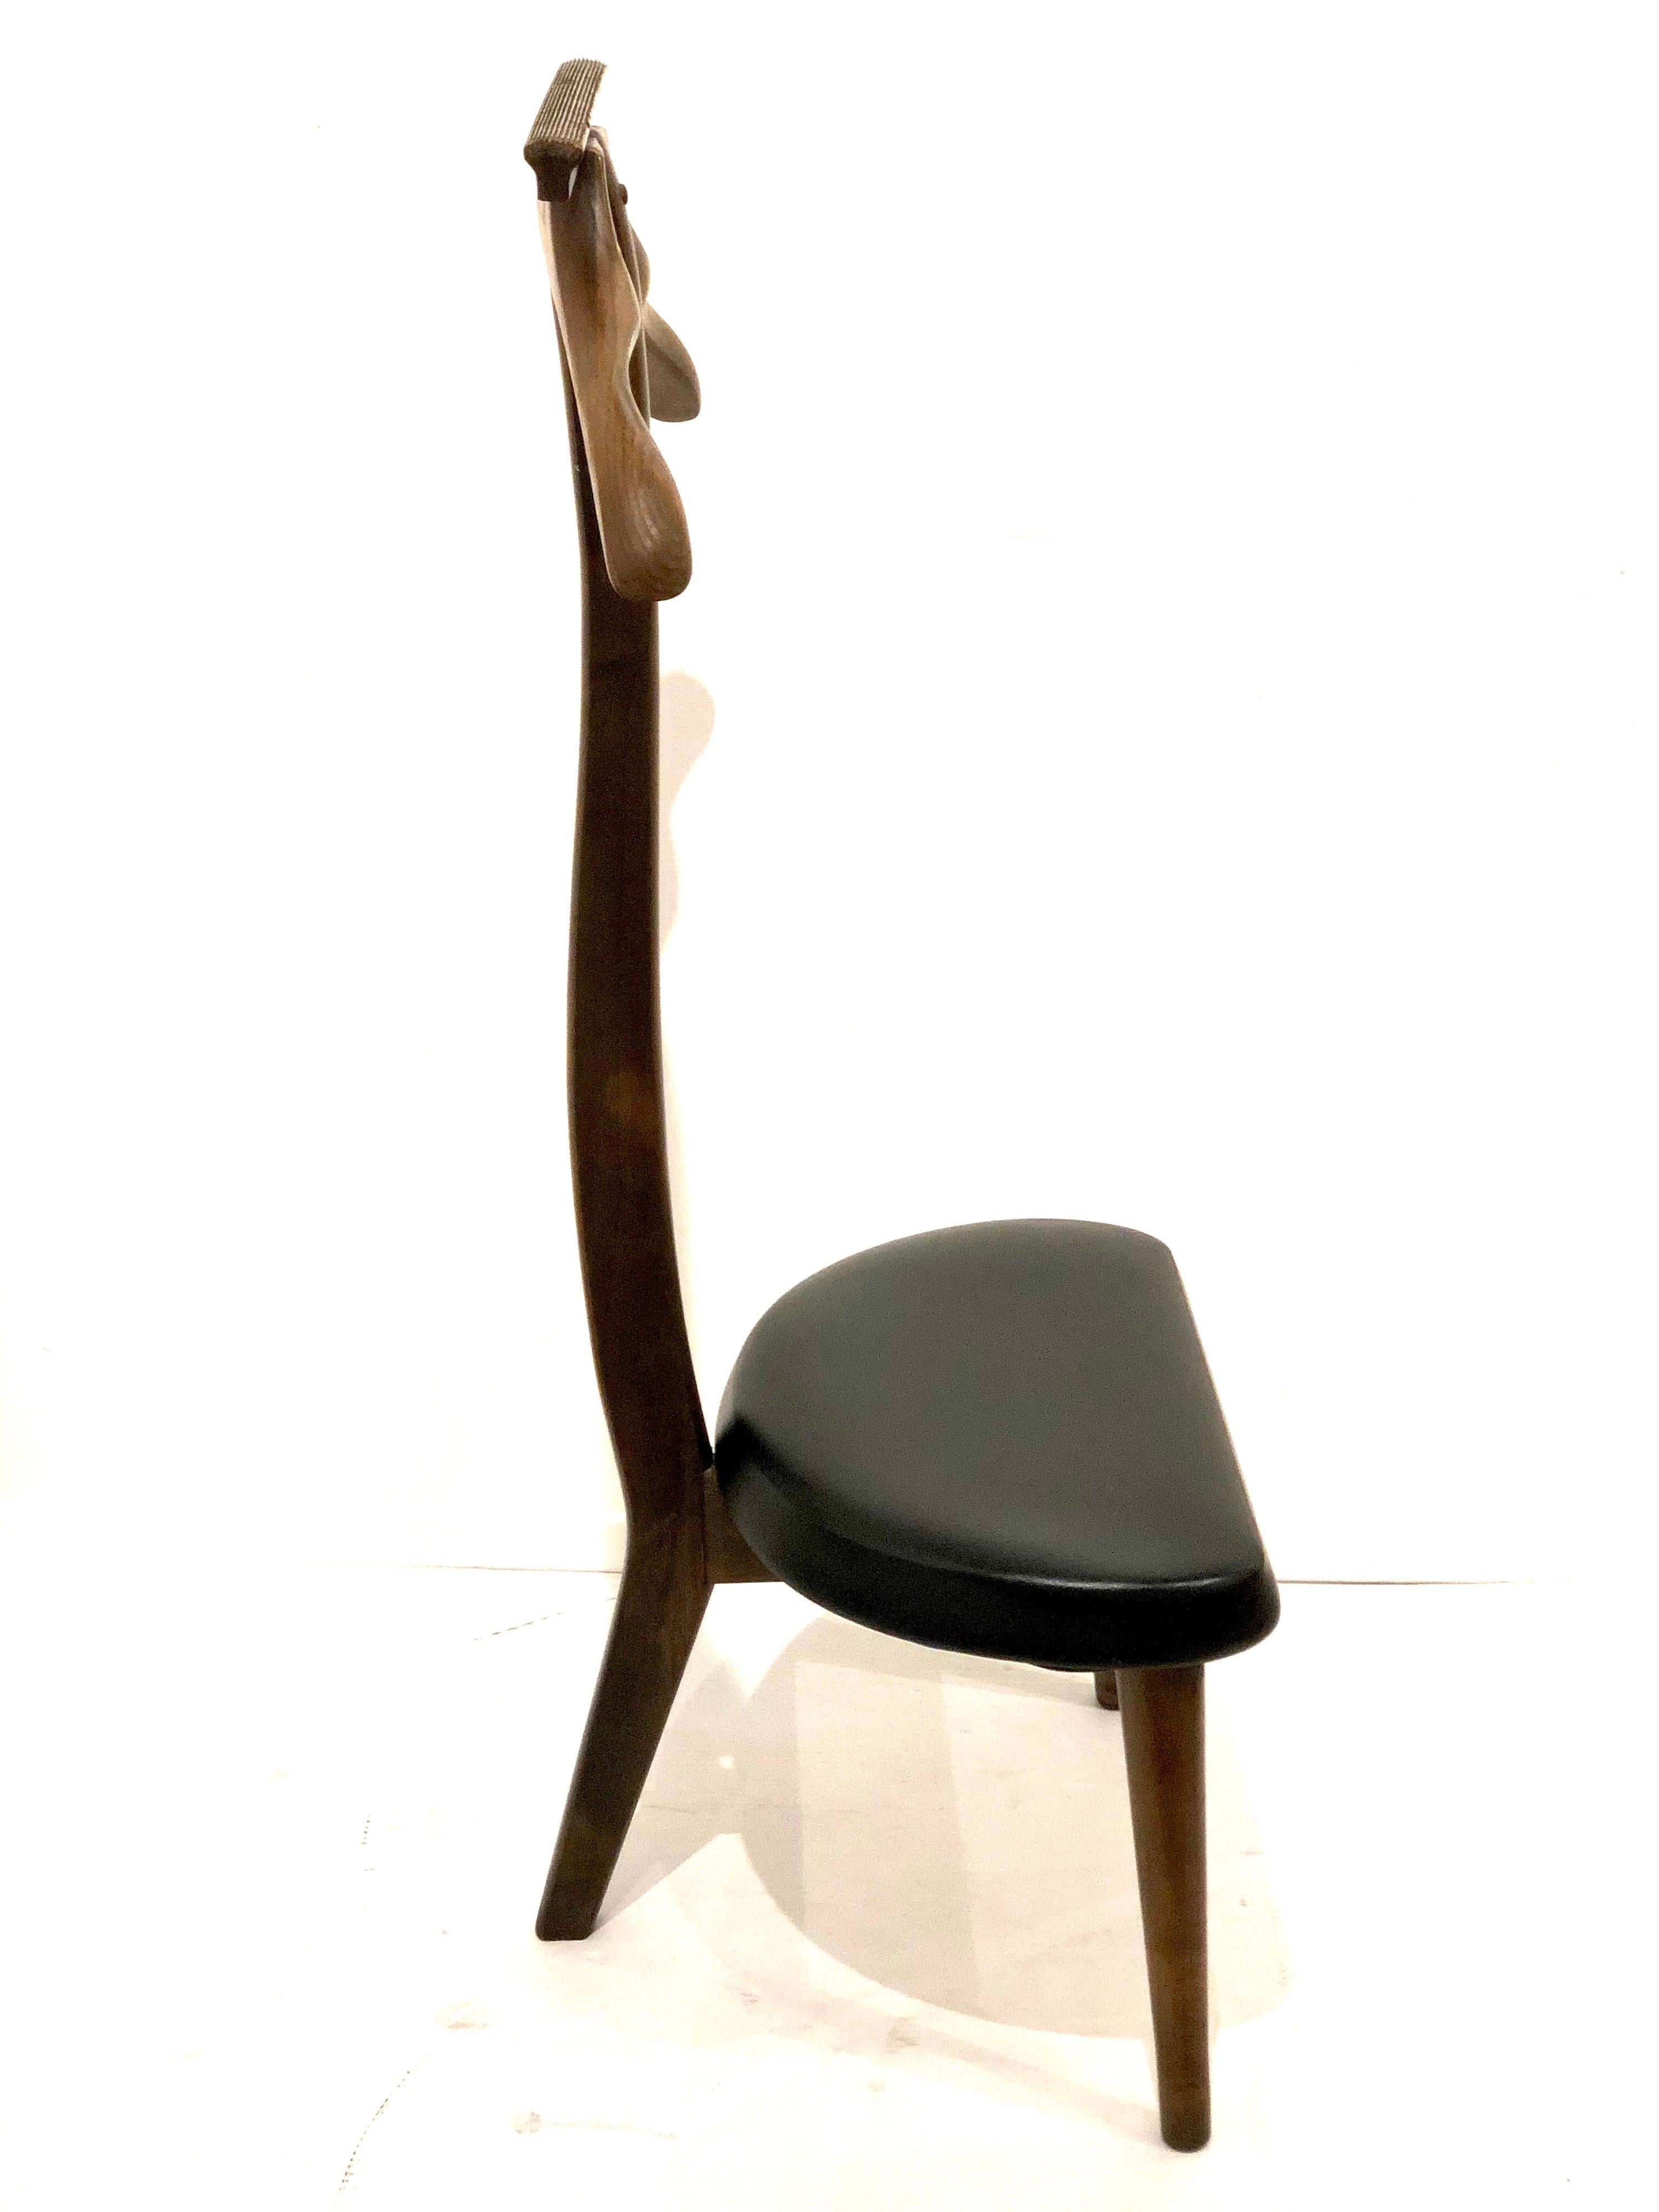 Mid-Century Modern walnut men's valet stand with black Naugahyde, circa 1950s. Simple design with clean leans in original good vintage condition.